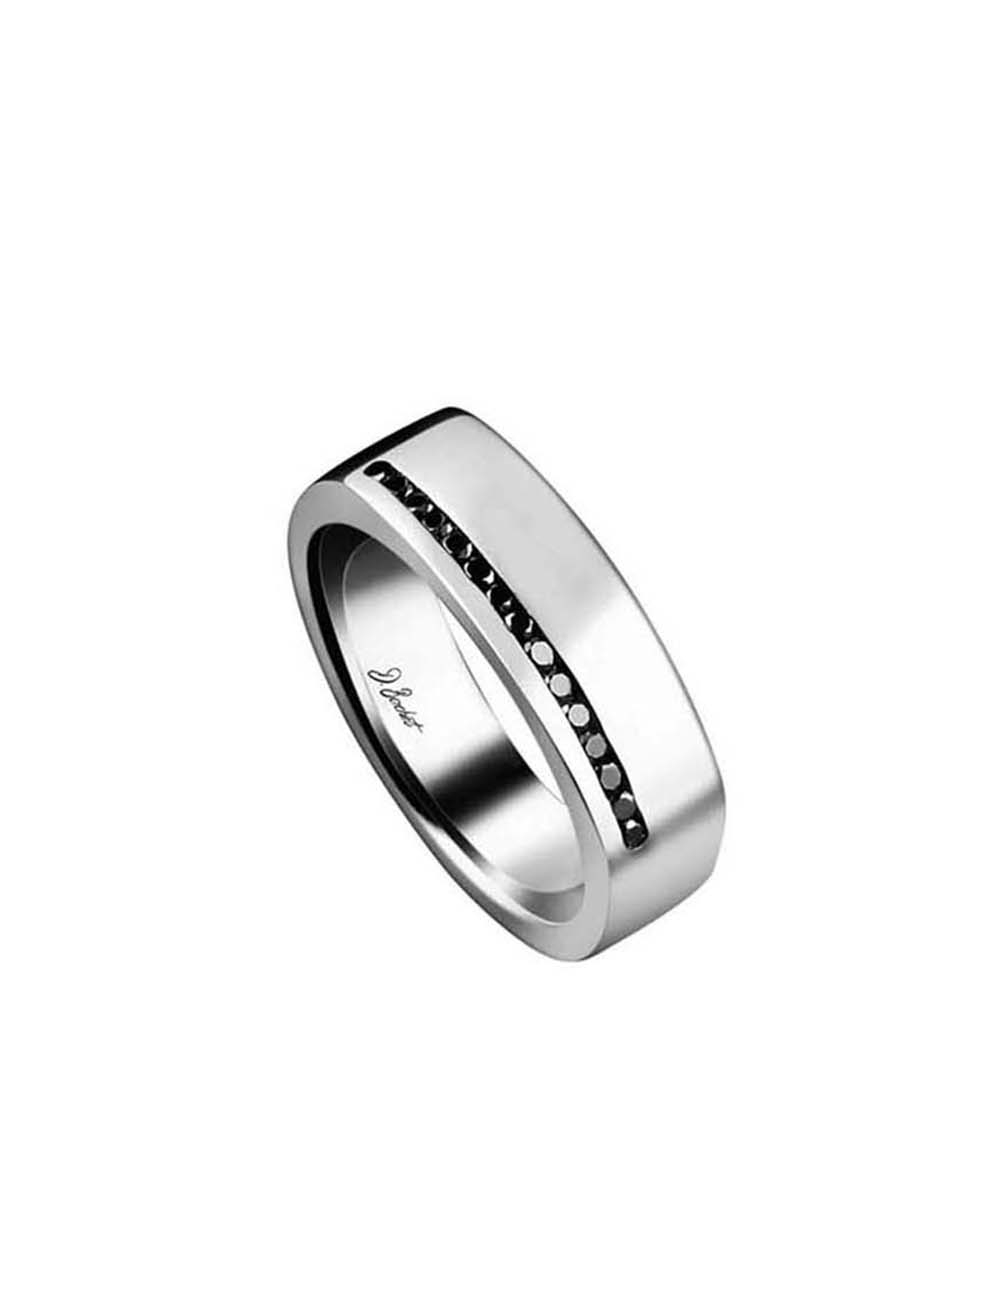 Luxury signet ring with a sleek and elegant design, ideal for wedding or engagement.